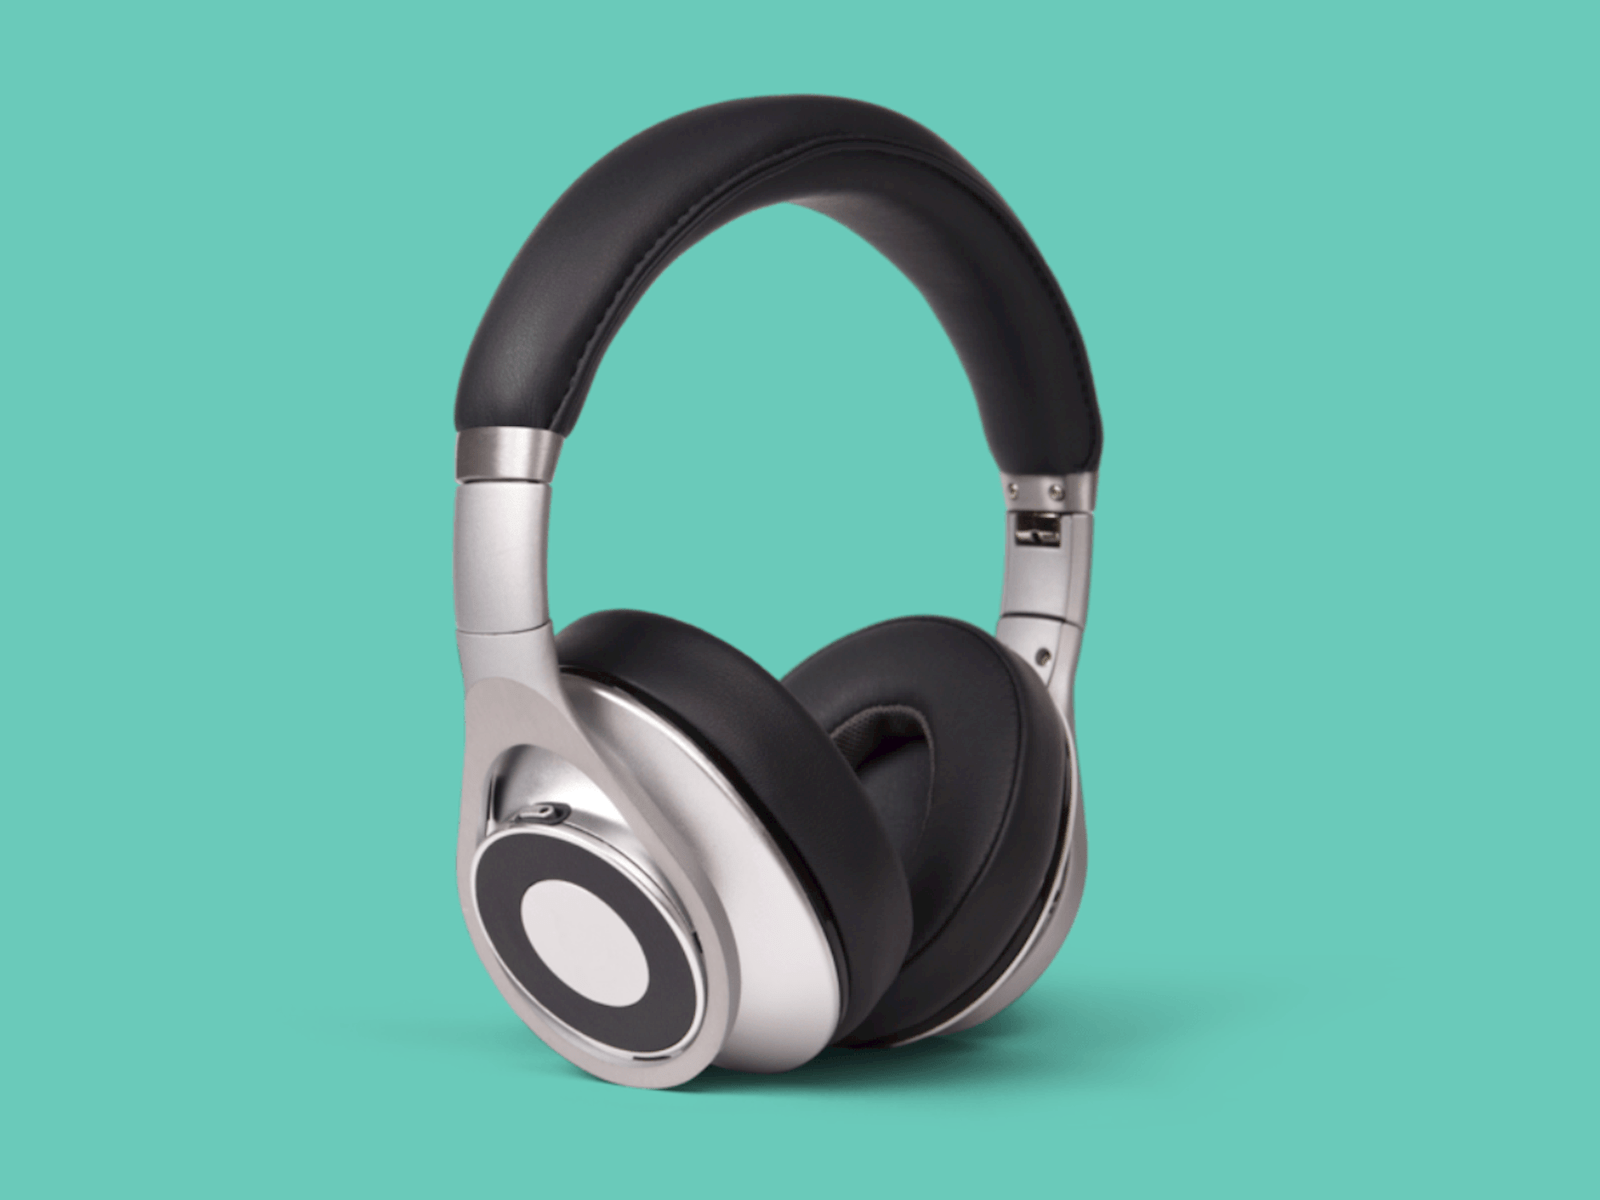 Headphones on a teal background